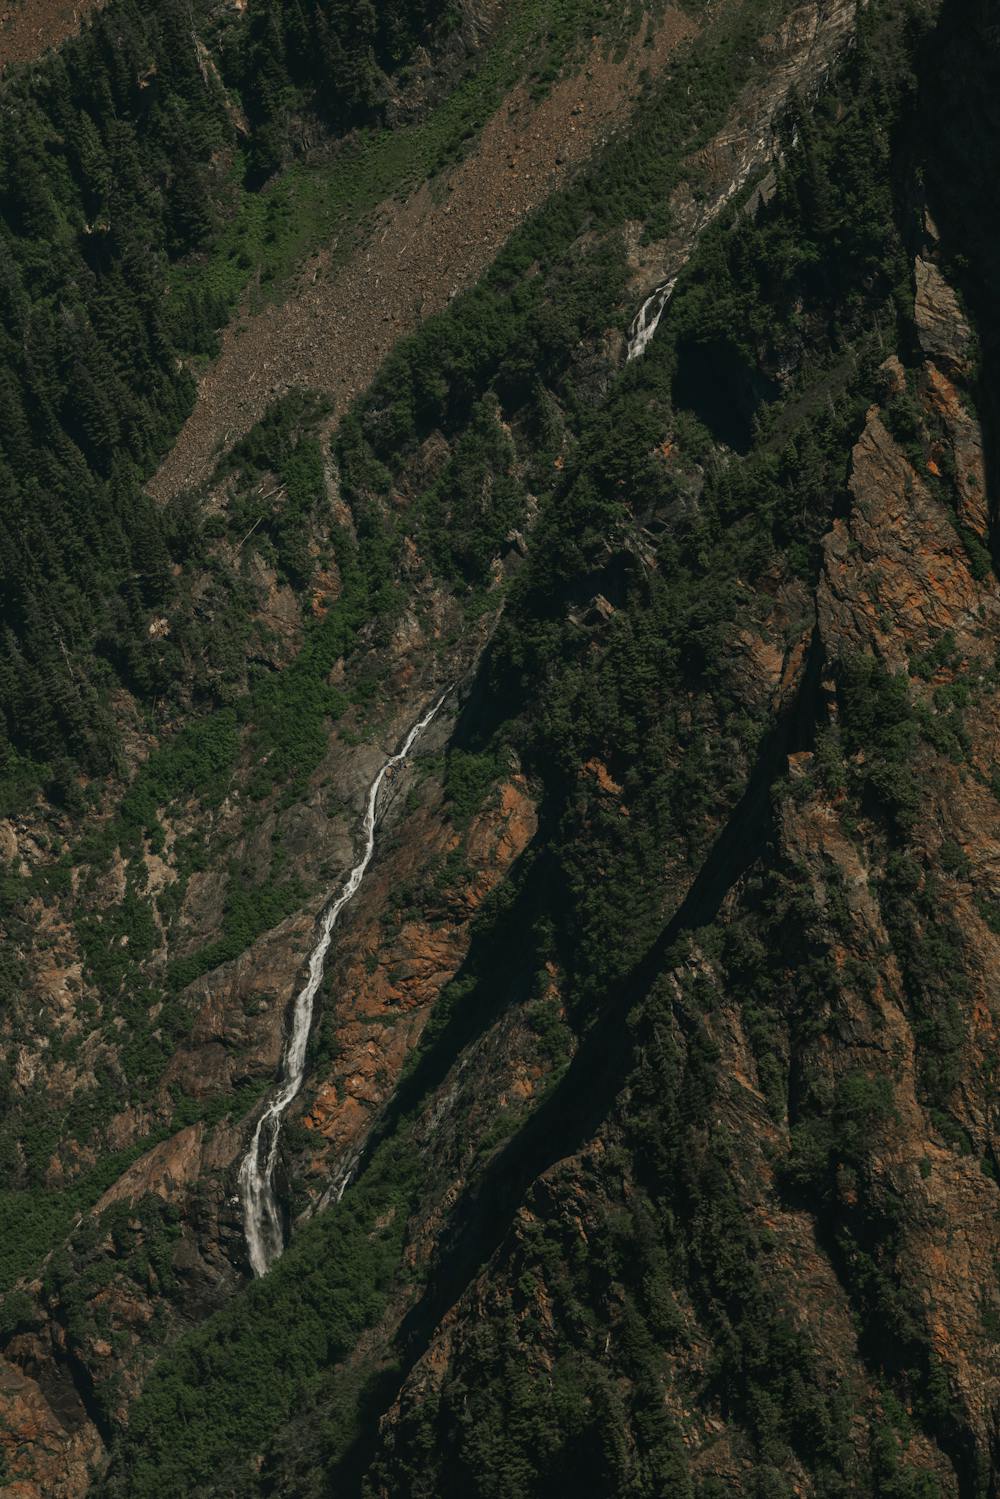 Waterfall visible from Cheam Peak to the right